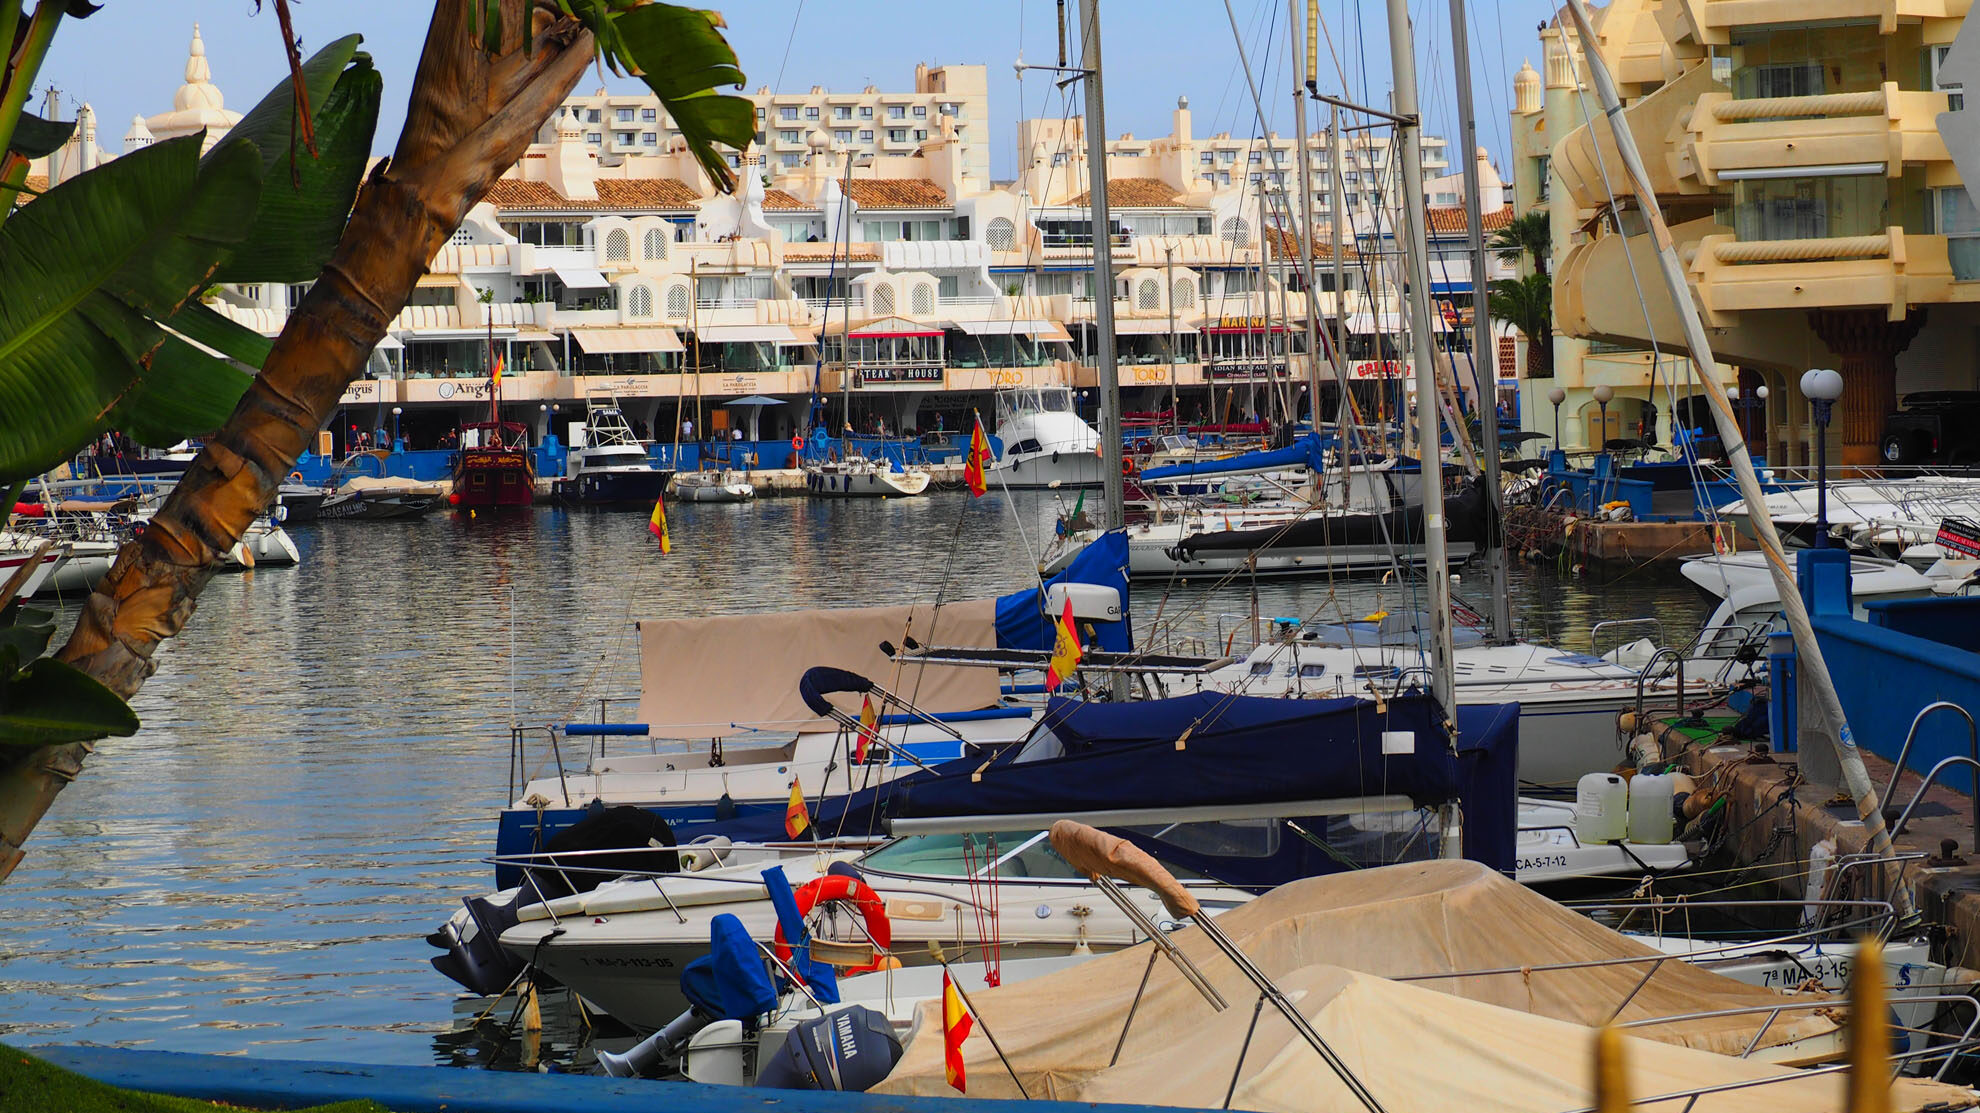 The cable car and other attractions in Benalmádena